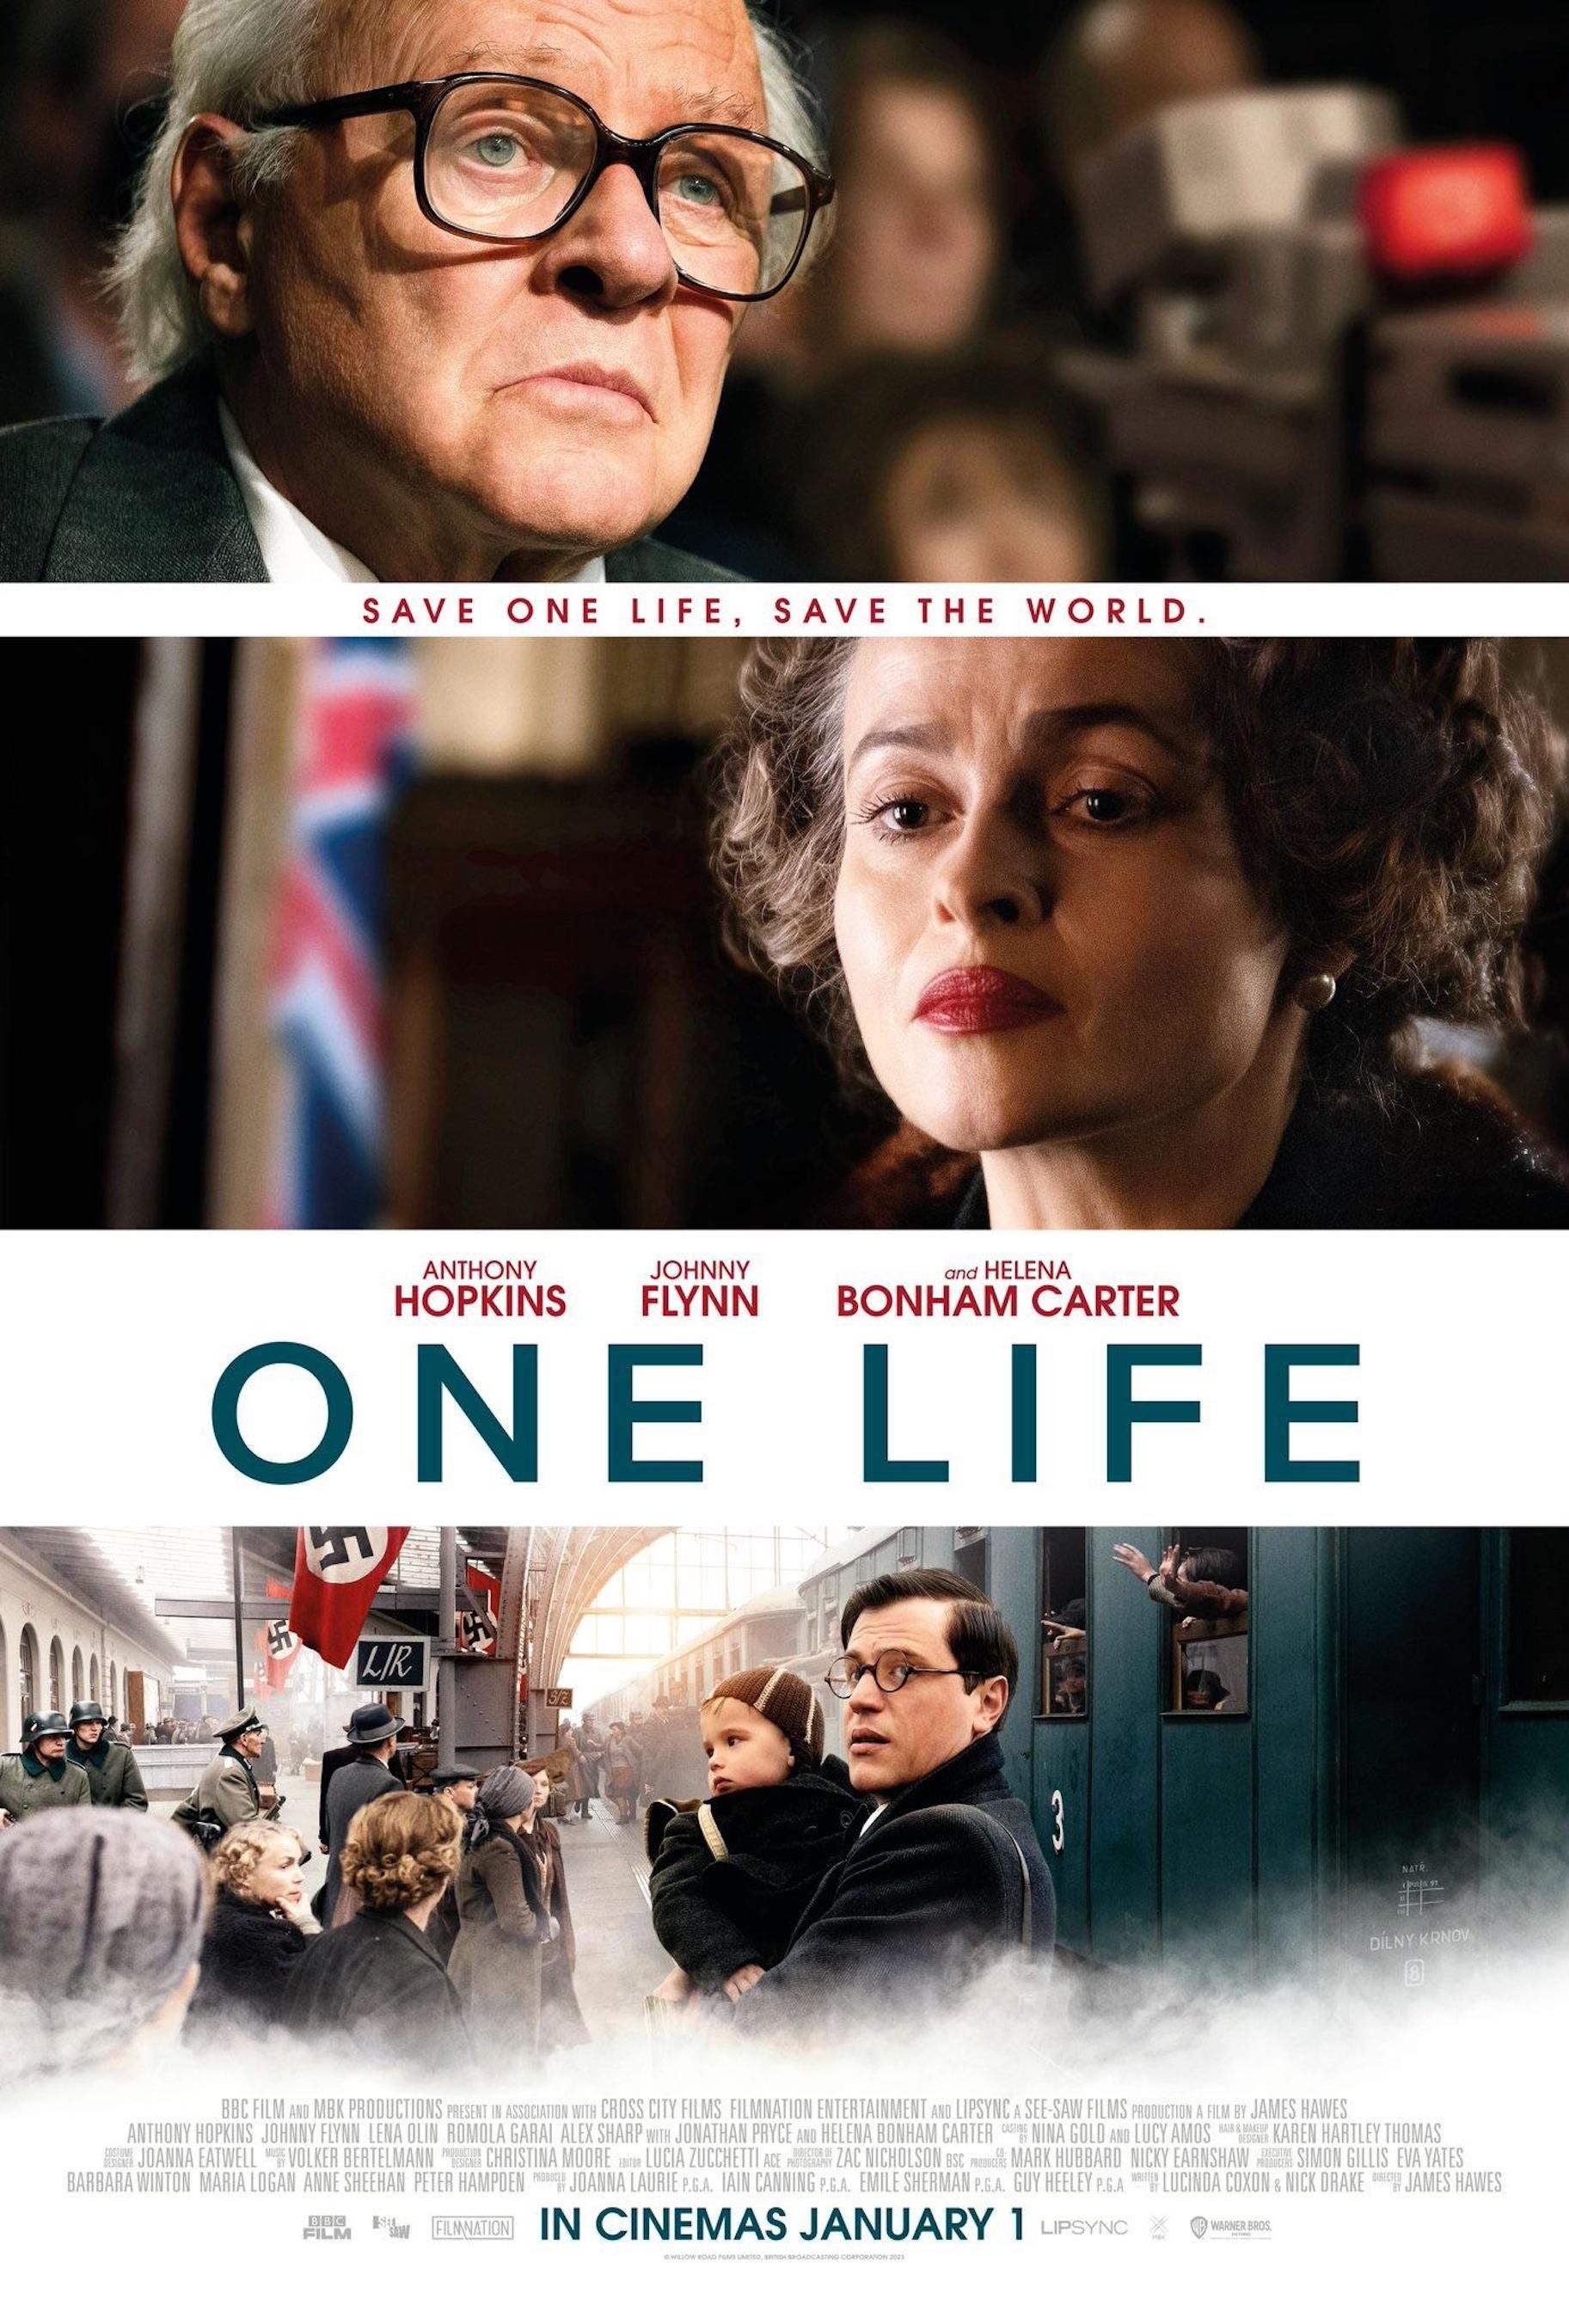 Where to Watch 'One Life' Find Showtimes in the UK